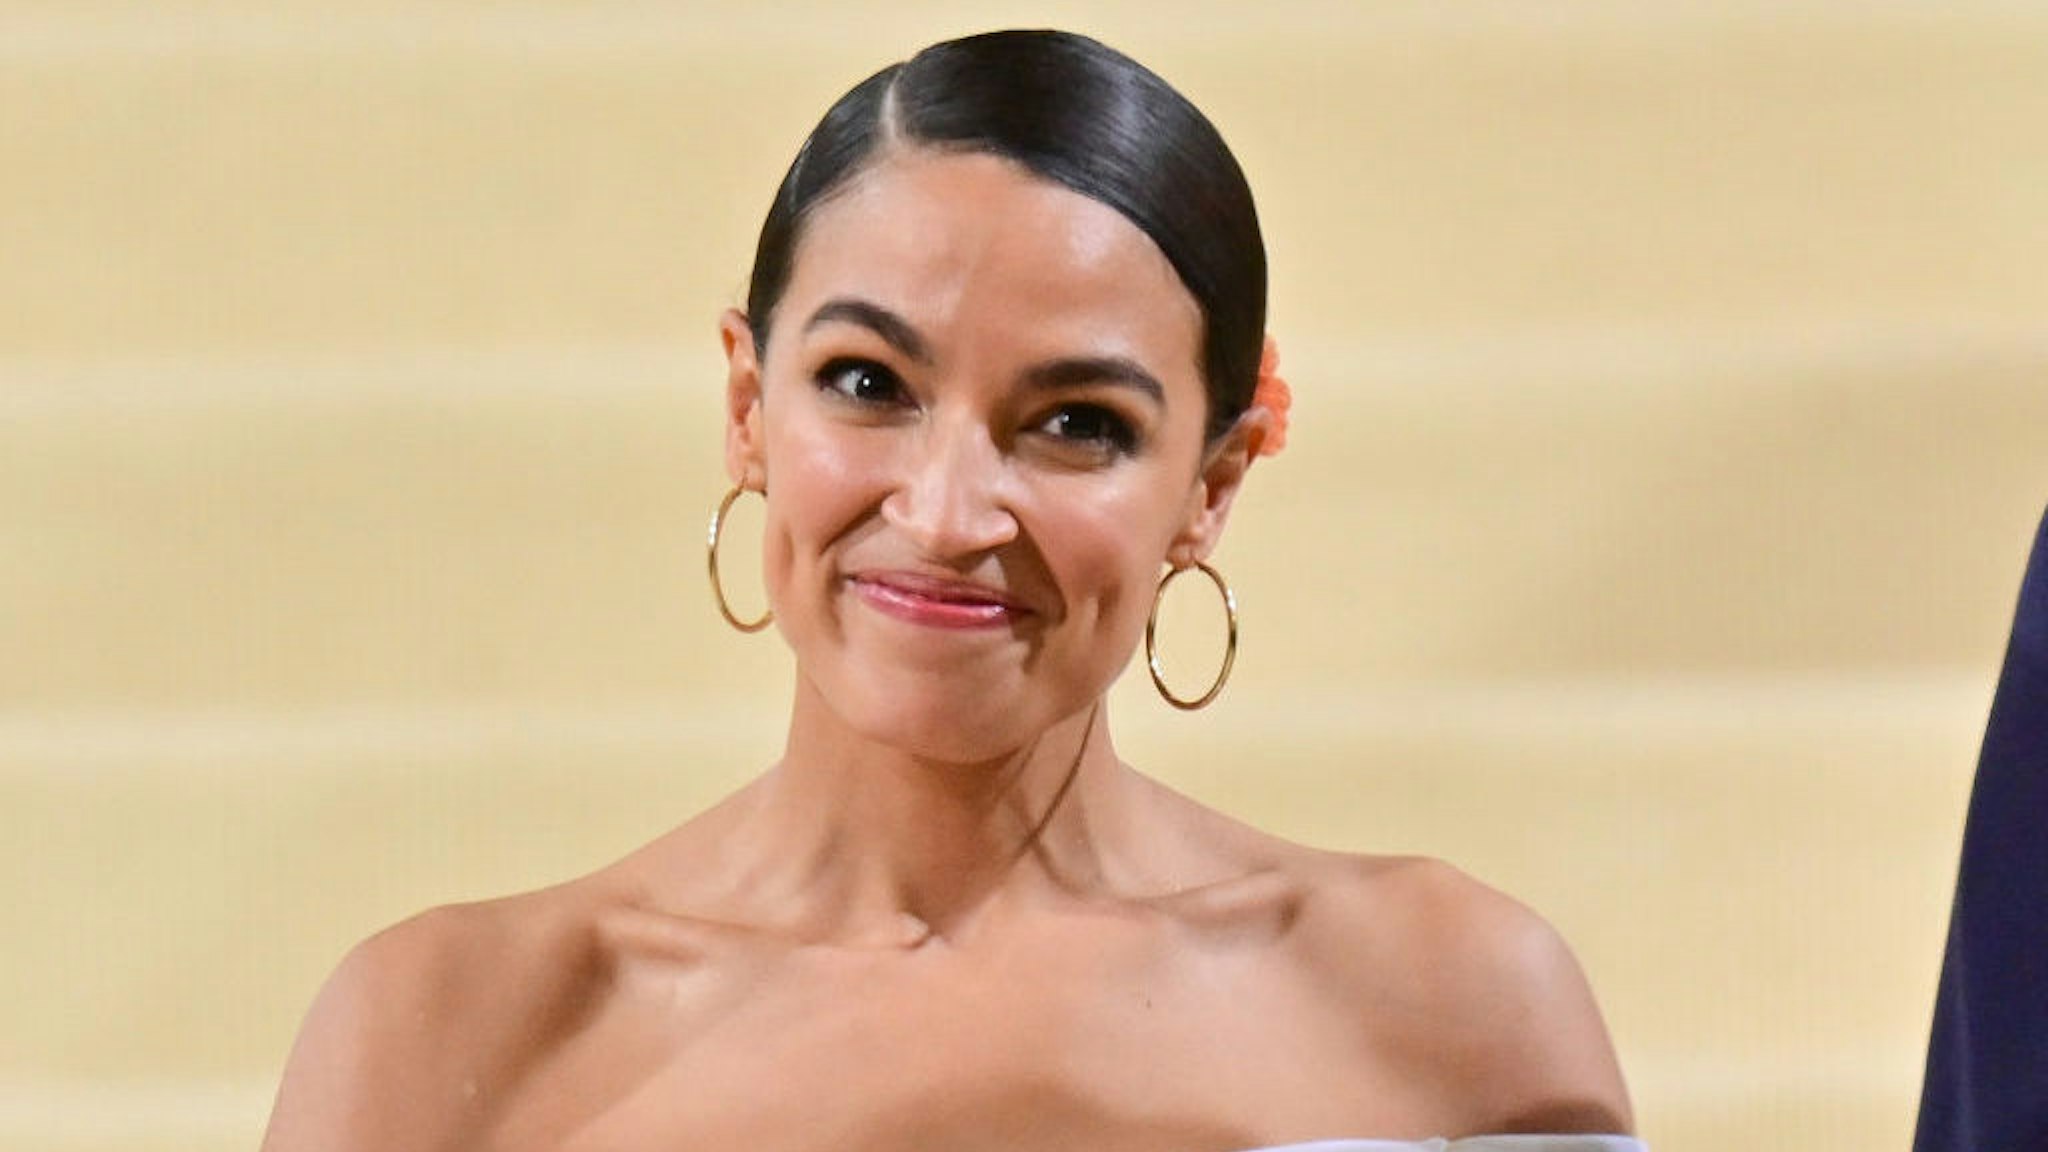 NEW YORK, NEW YORK - SEPTEMBER 13: Alexandria Ocasio-Cortez leaves the 2021 Met Gala Celebrating In America: A Lexicon Of Fashion at Metropolitan Museum of Art on September 13, 2021 in New York City. (Photo by James Devaney/GC Images)